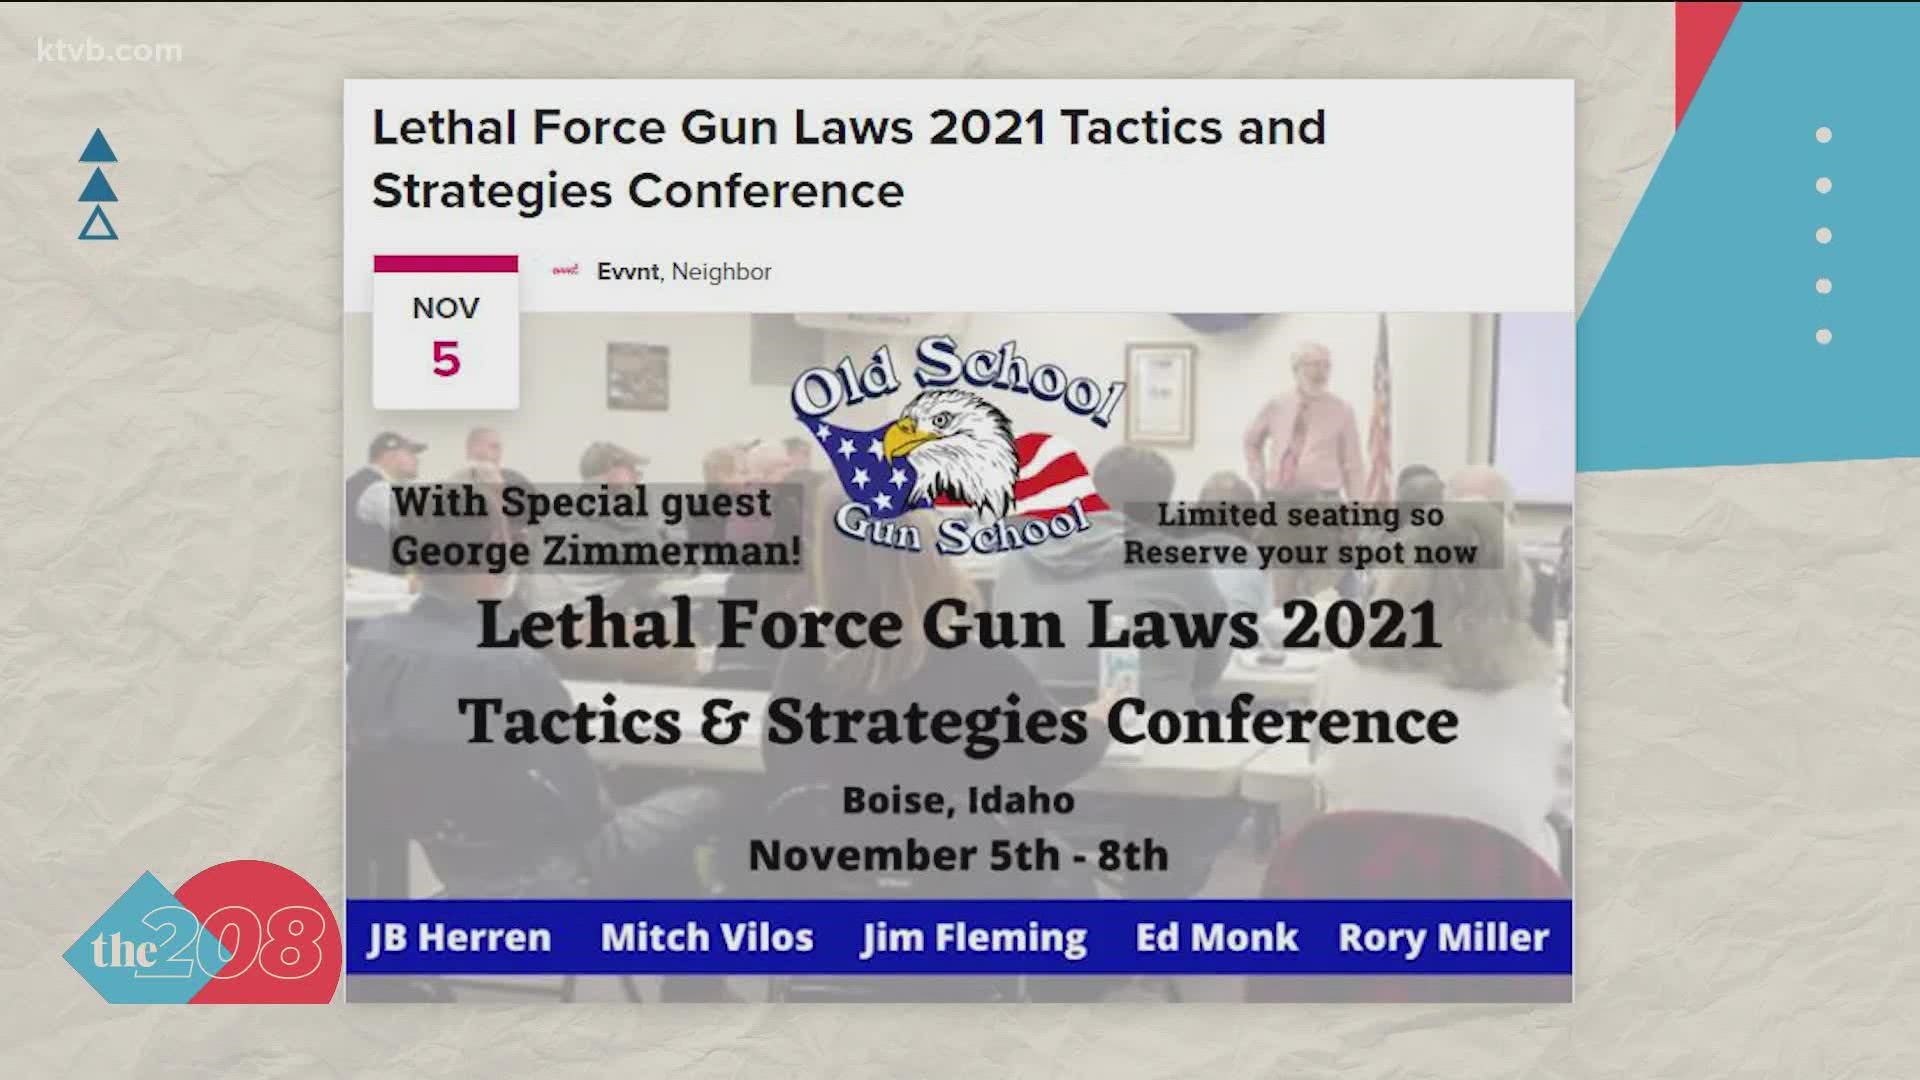 The conference, called the “Lethal Force Gun Laws 2021,” was scheduled to run Nov. 5-8 at the hotel, according to the event’s webpage, which has since been removed.